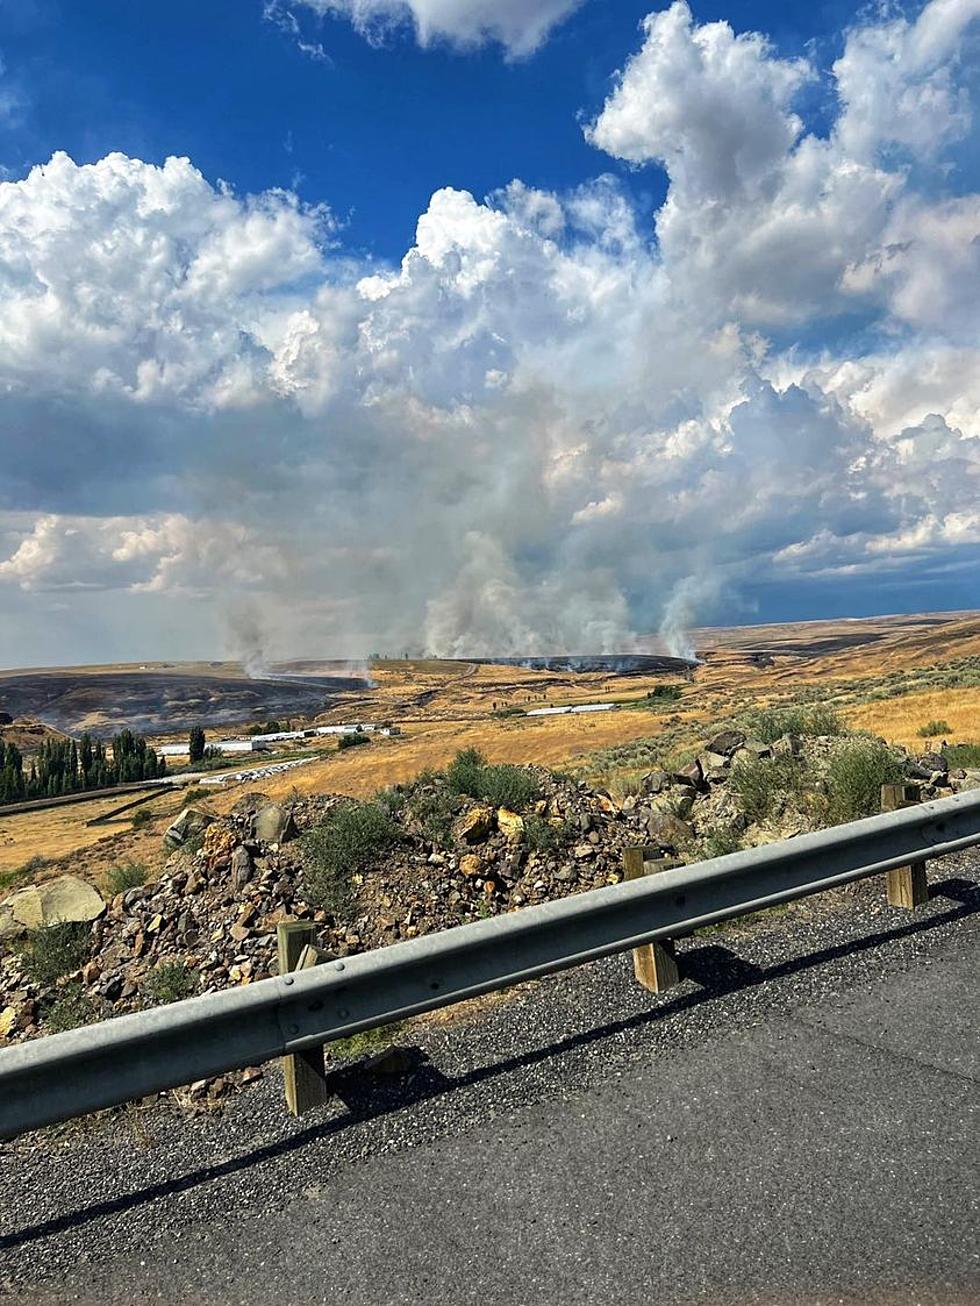 FEMA Assisting With Cost To Fight Baird Springs Fire Near Quincy